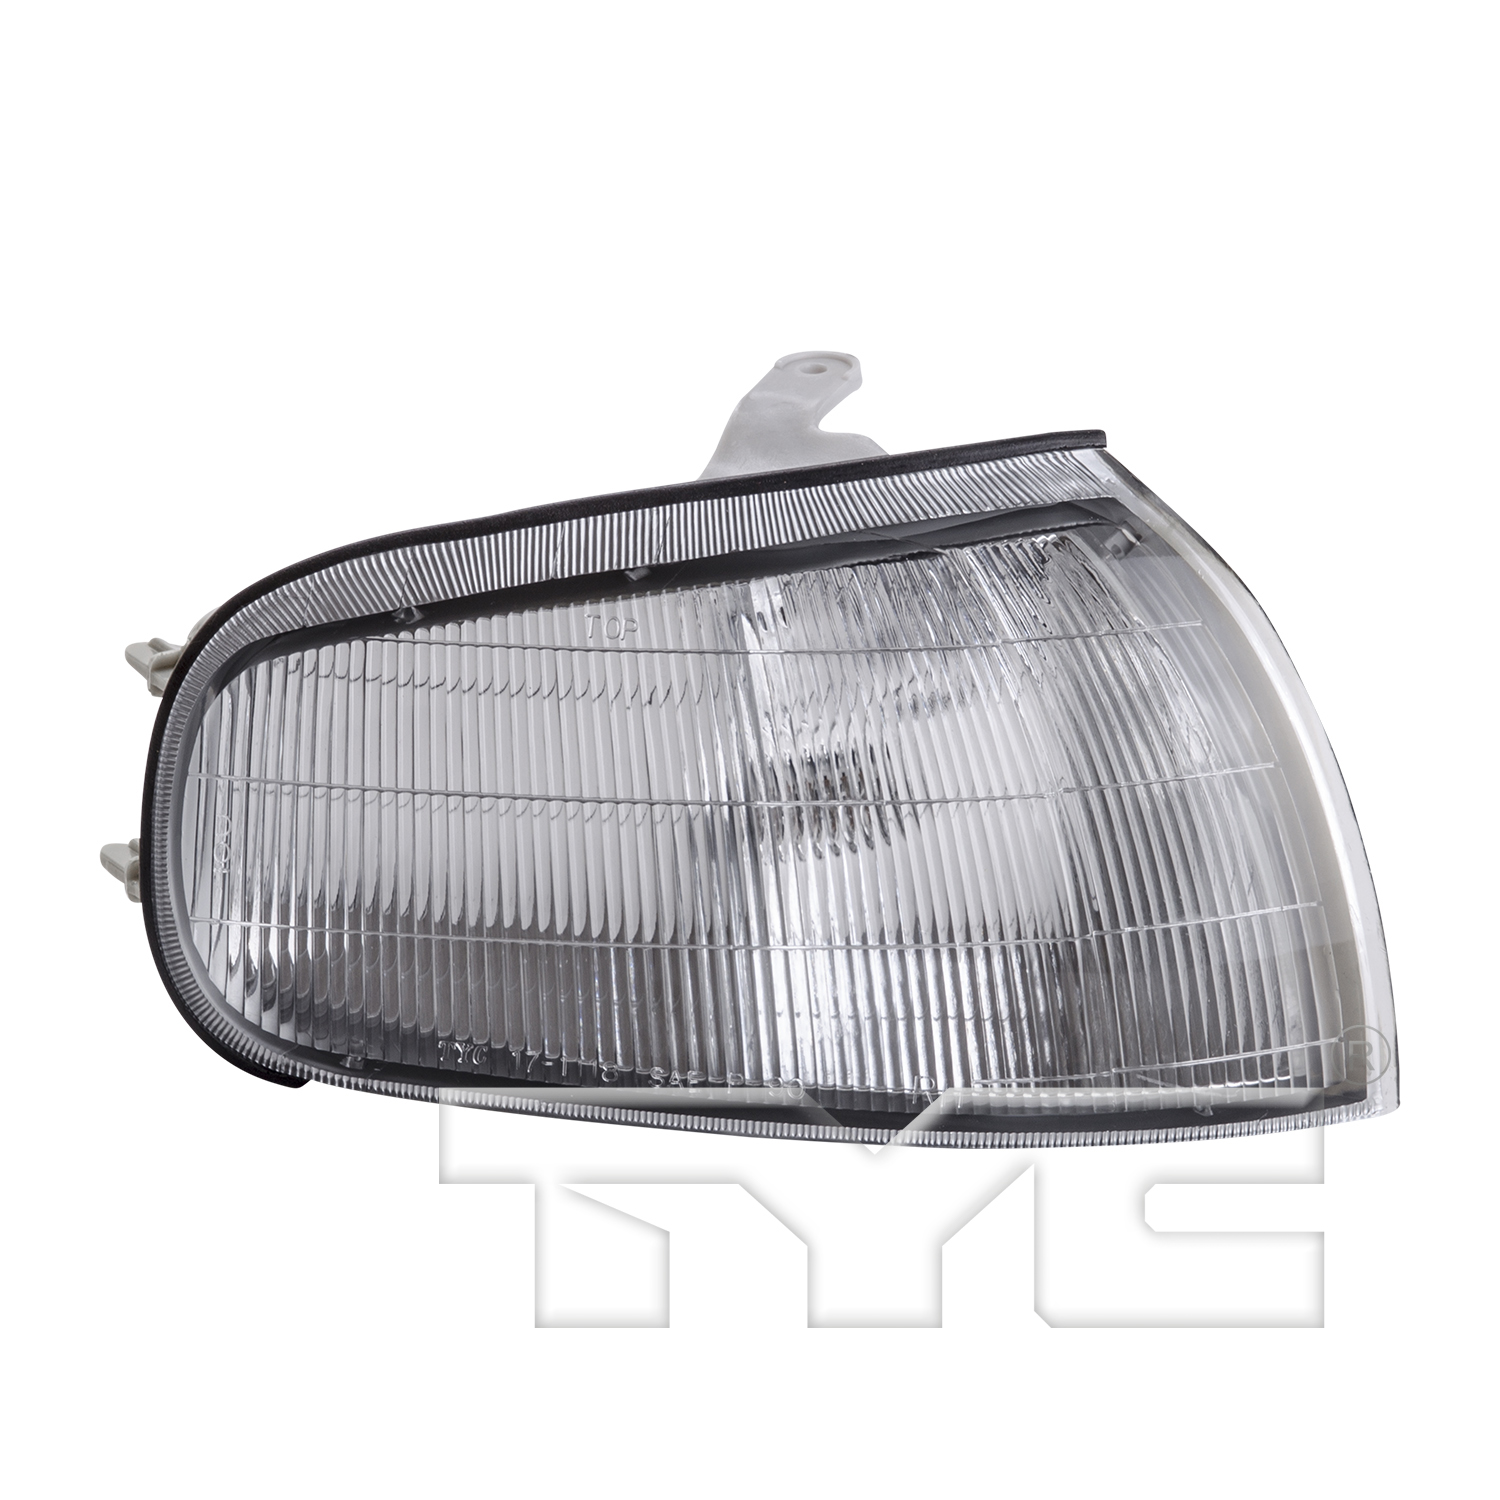 Aftermarket LAMPS for TOYOTA - CAMRY, CAMRY,92-94,RT Parklamp assy